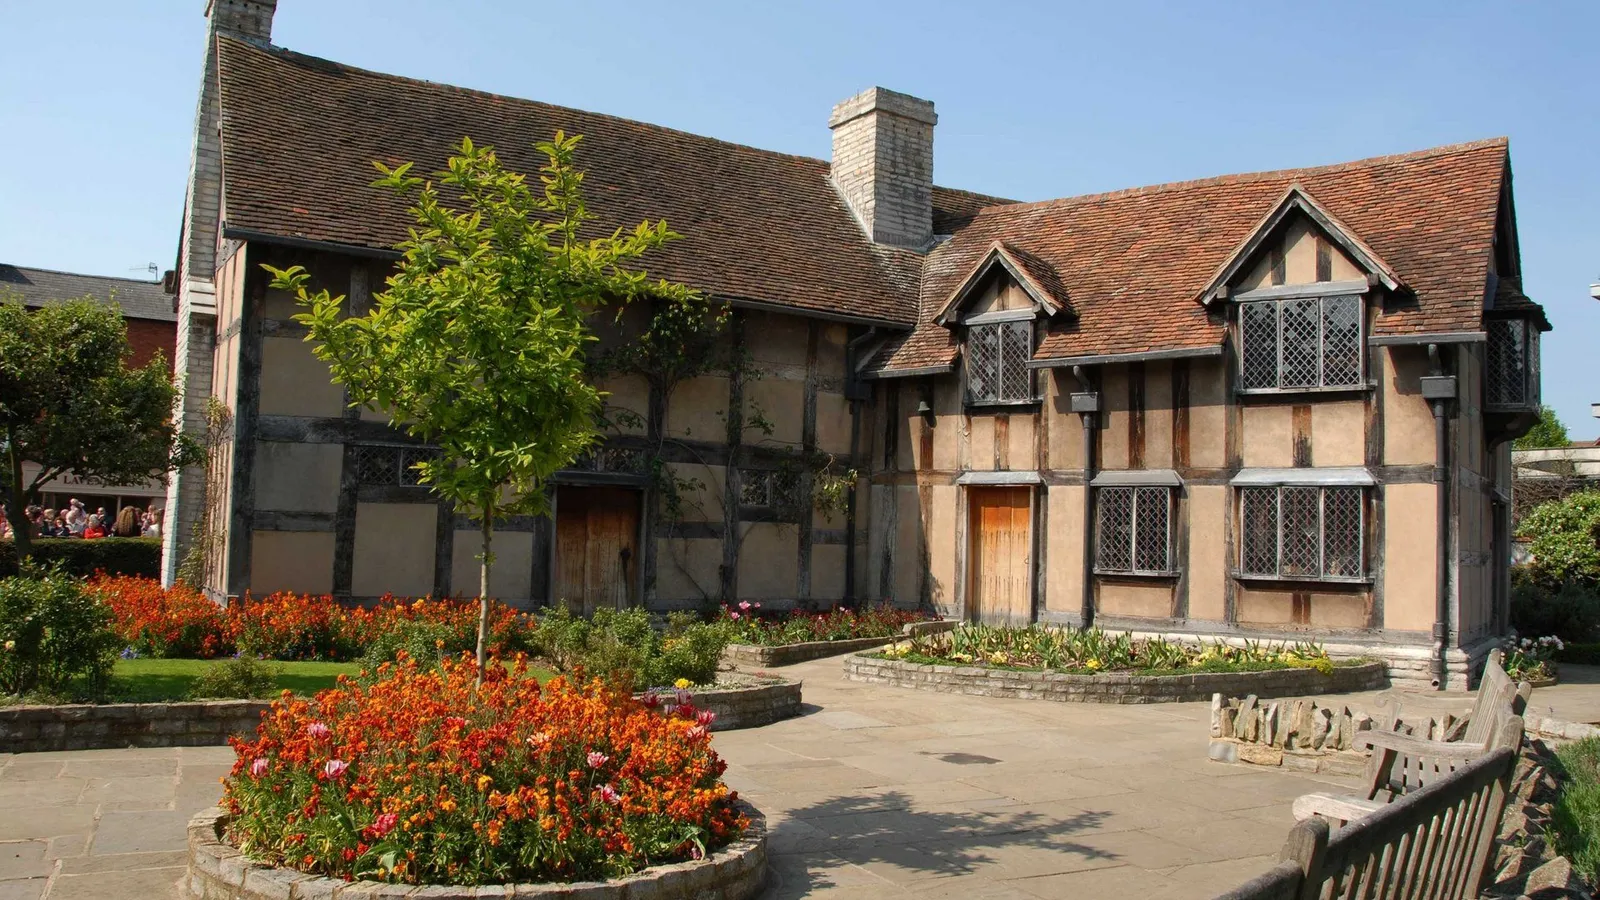 The birthplace of Shakespeare